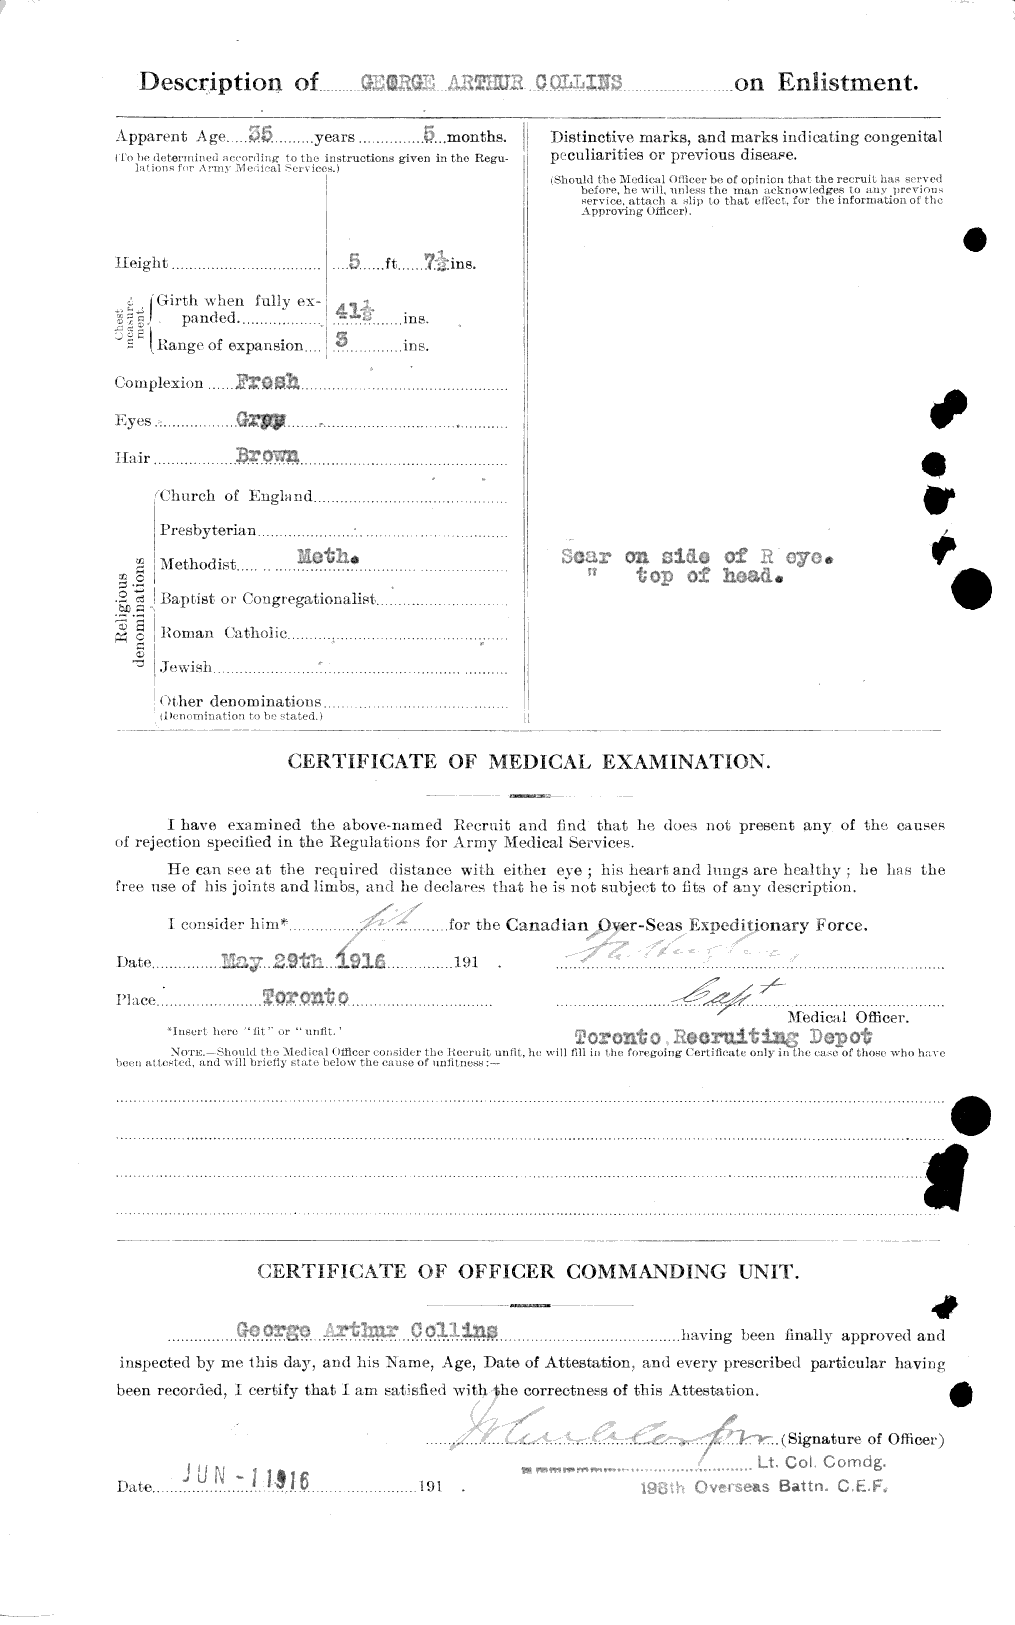 Personnel Records of the First World War - CEF 037855b